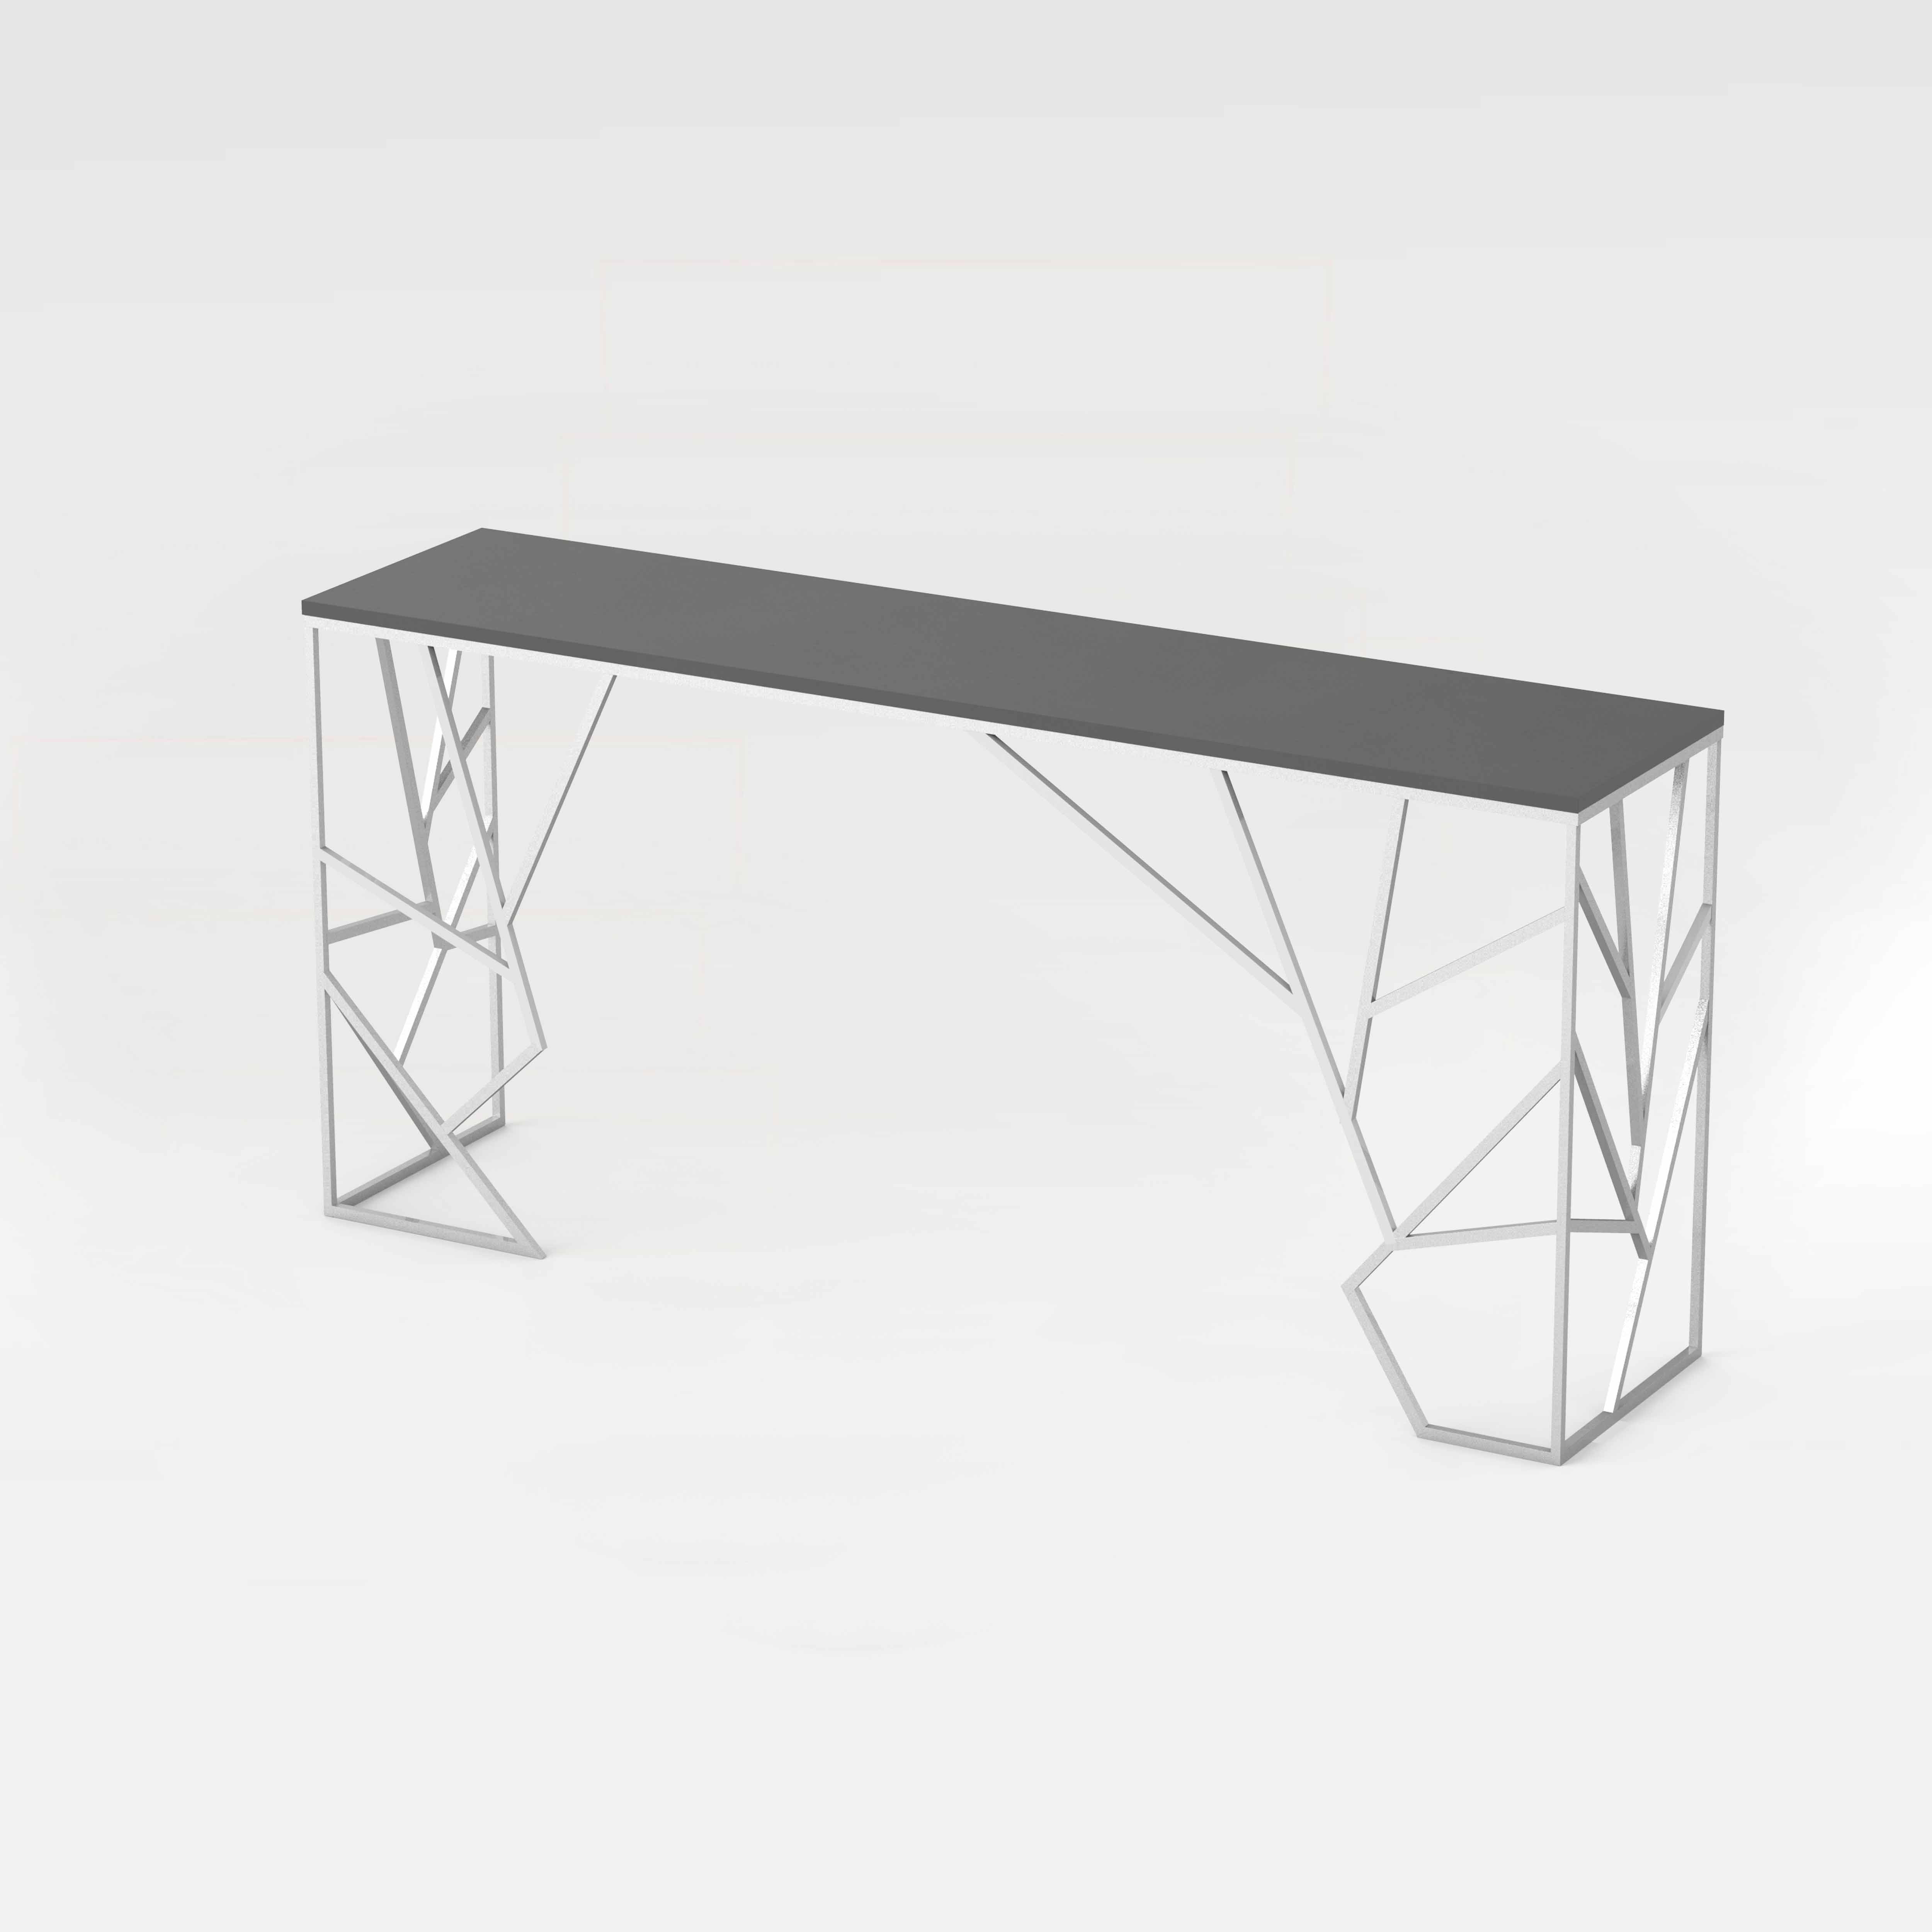 CO33 Concrete console table with steel frame in industrial look